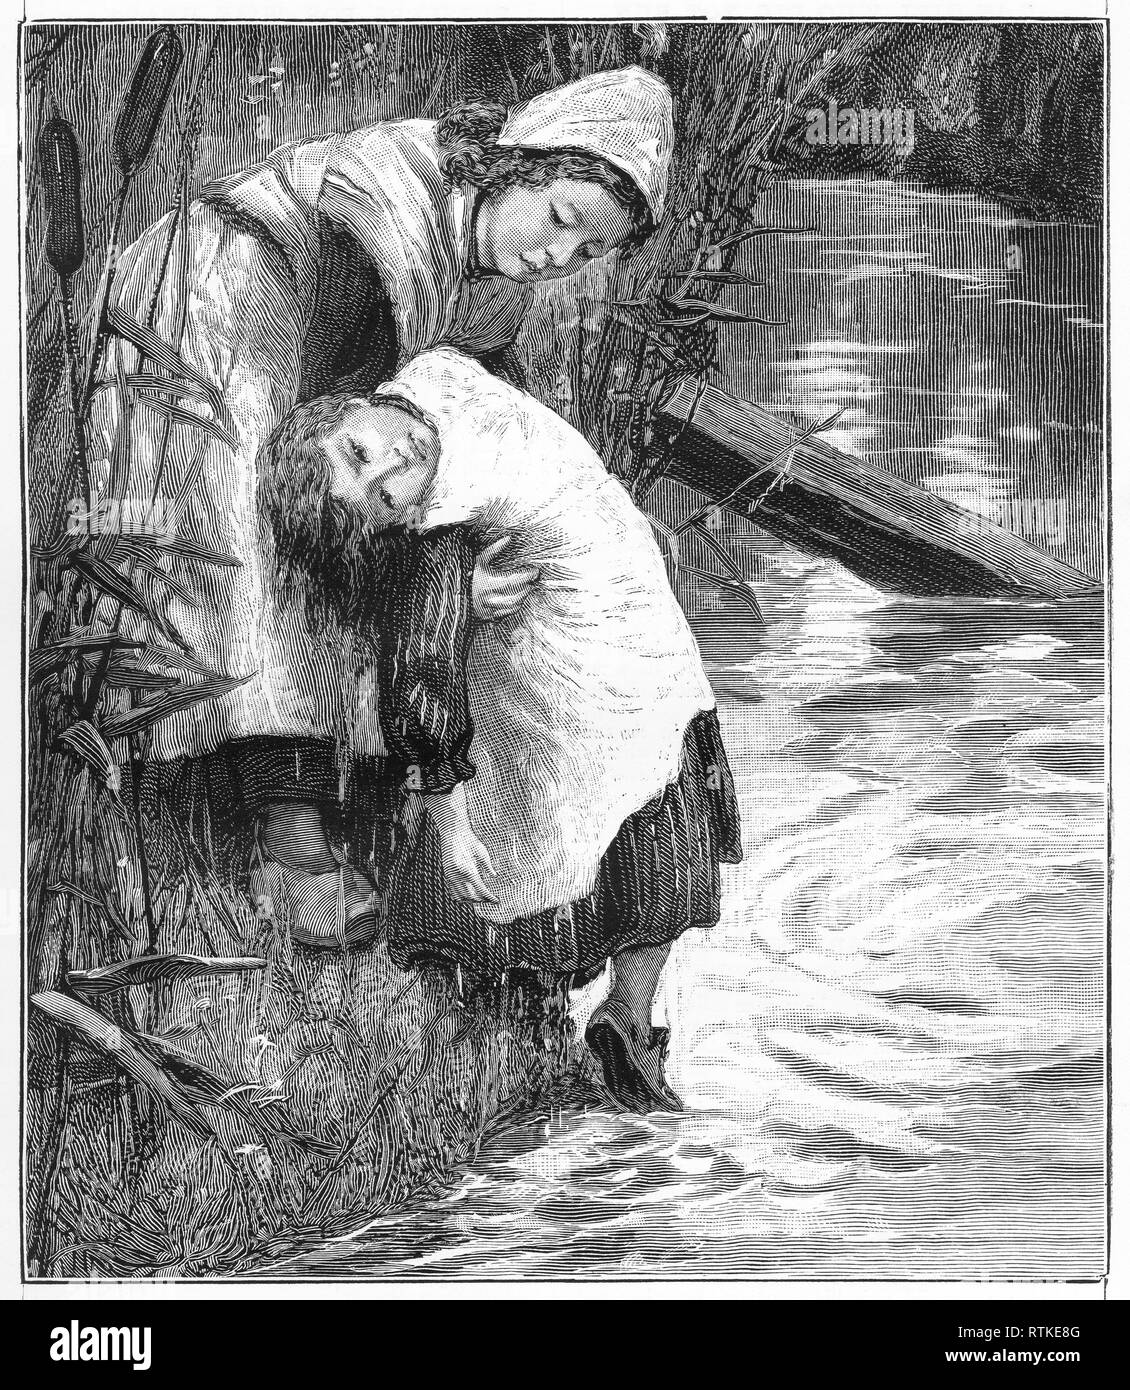 Engraving of a woman rescuing a drowning girl from the river. From Chatterbox magazine, 1905 Stock Photo